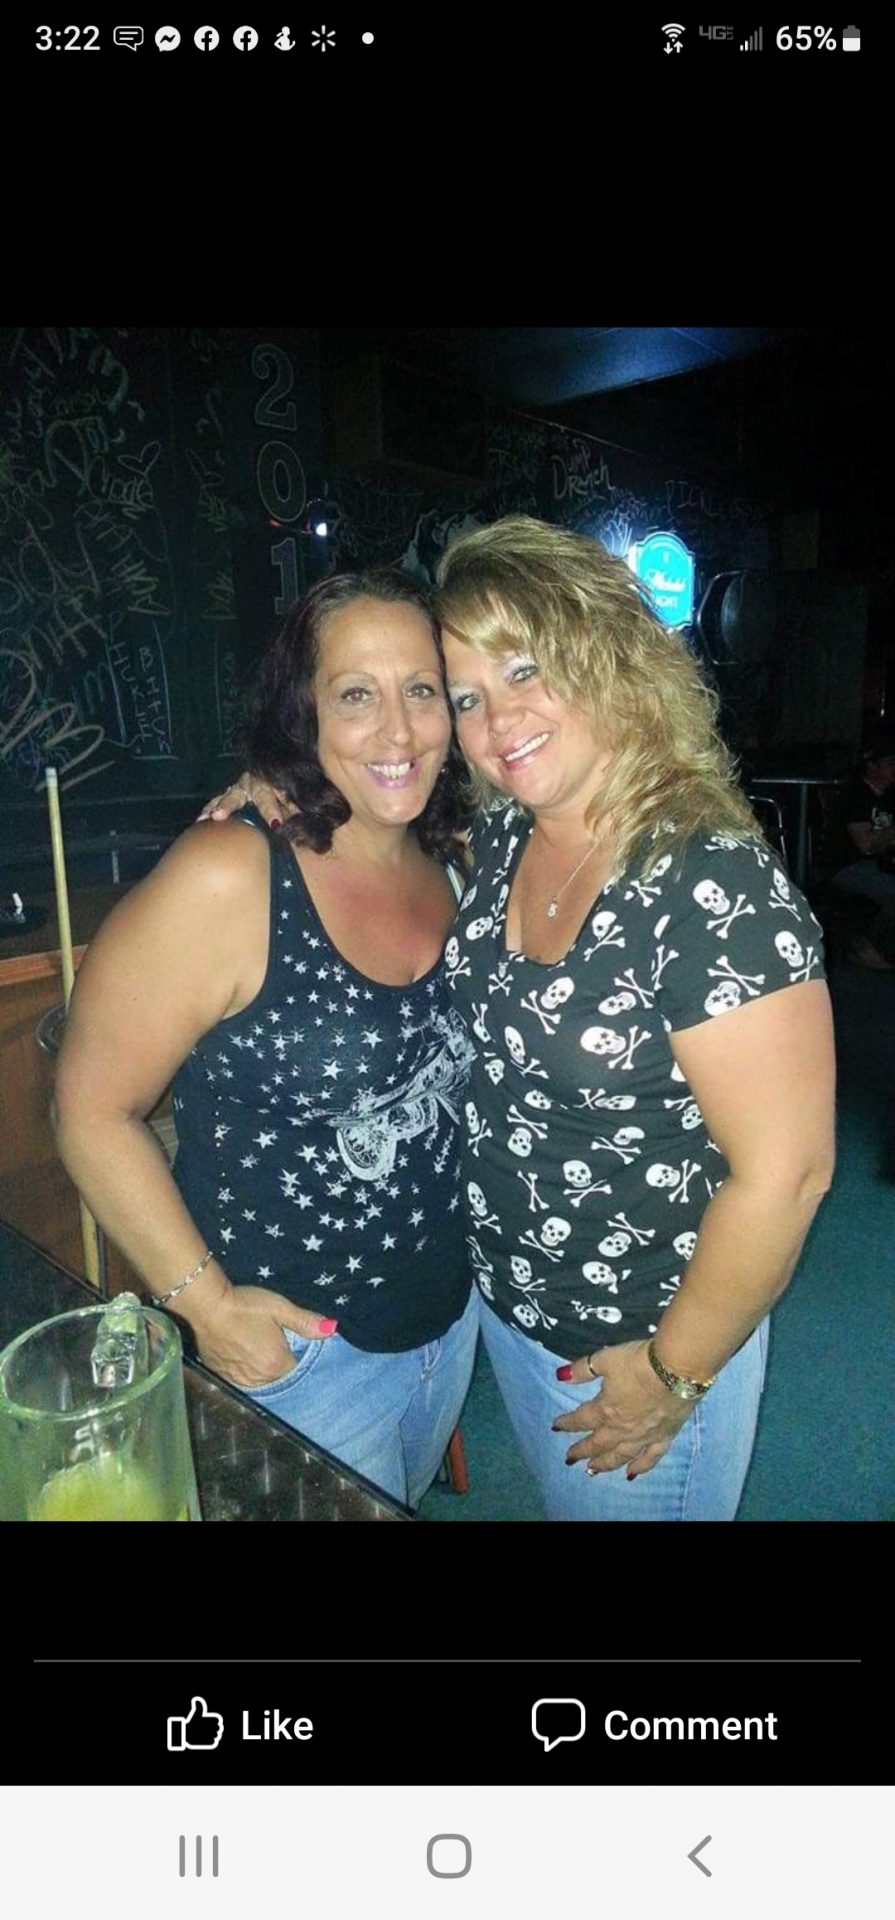 Michelle and I use to go to girls night at Johnny gs we always took pictures every Friday love ❤️ her gonna miss her smile and happy go lucky personality